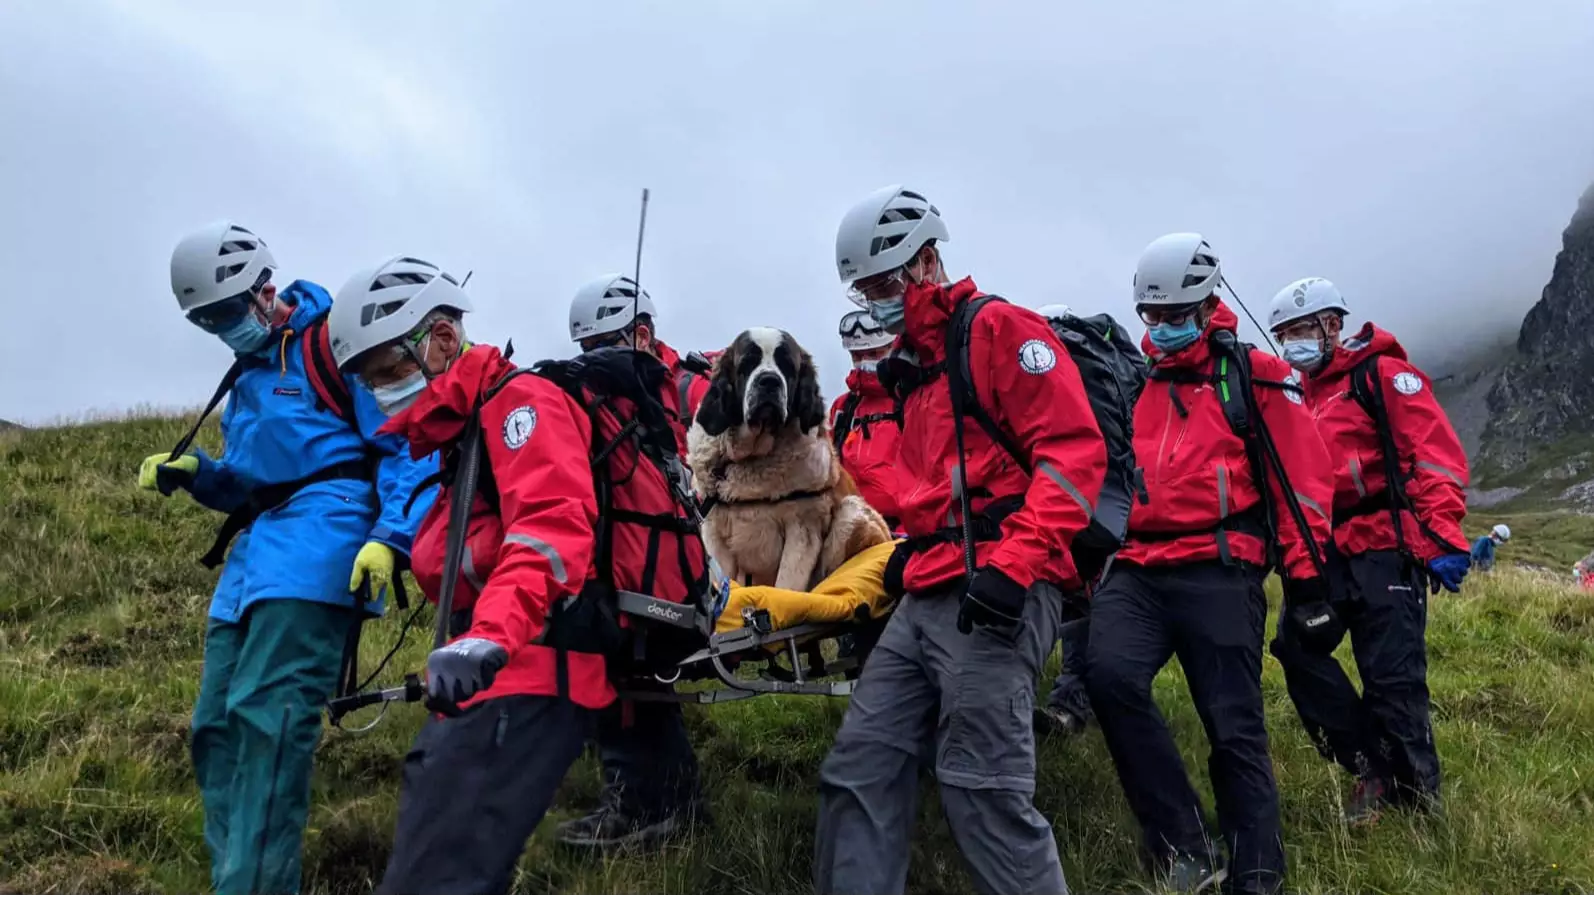 St Bernard Dog Rescued From Highest Mountain In England After She Collapsed